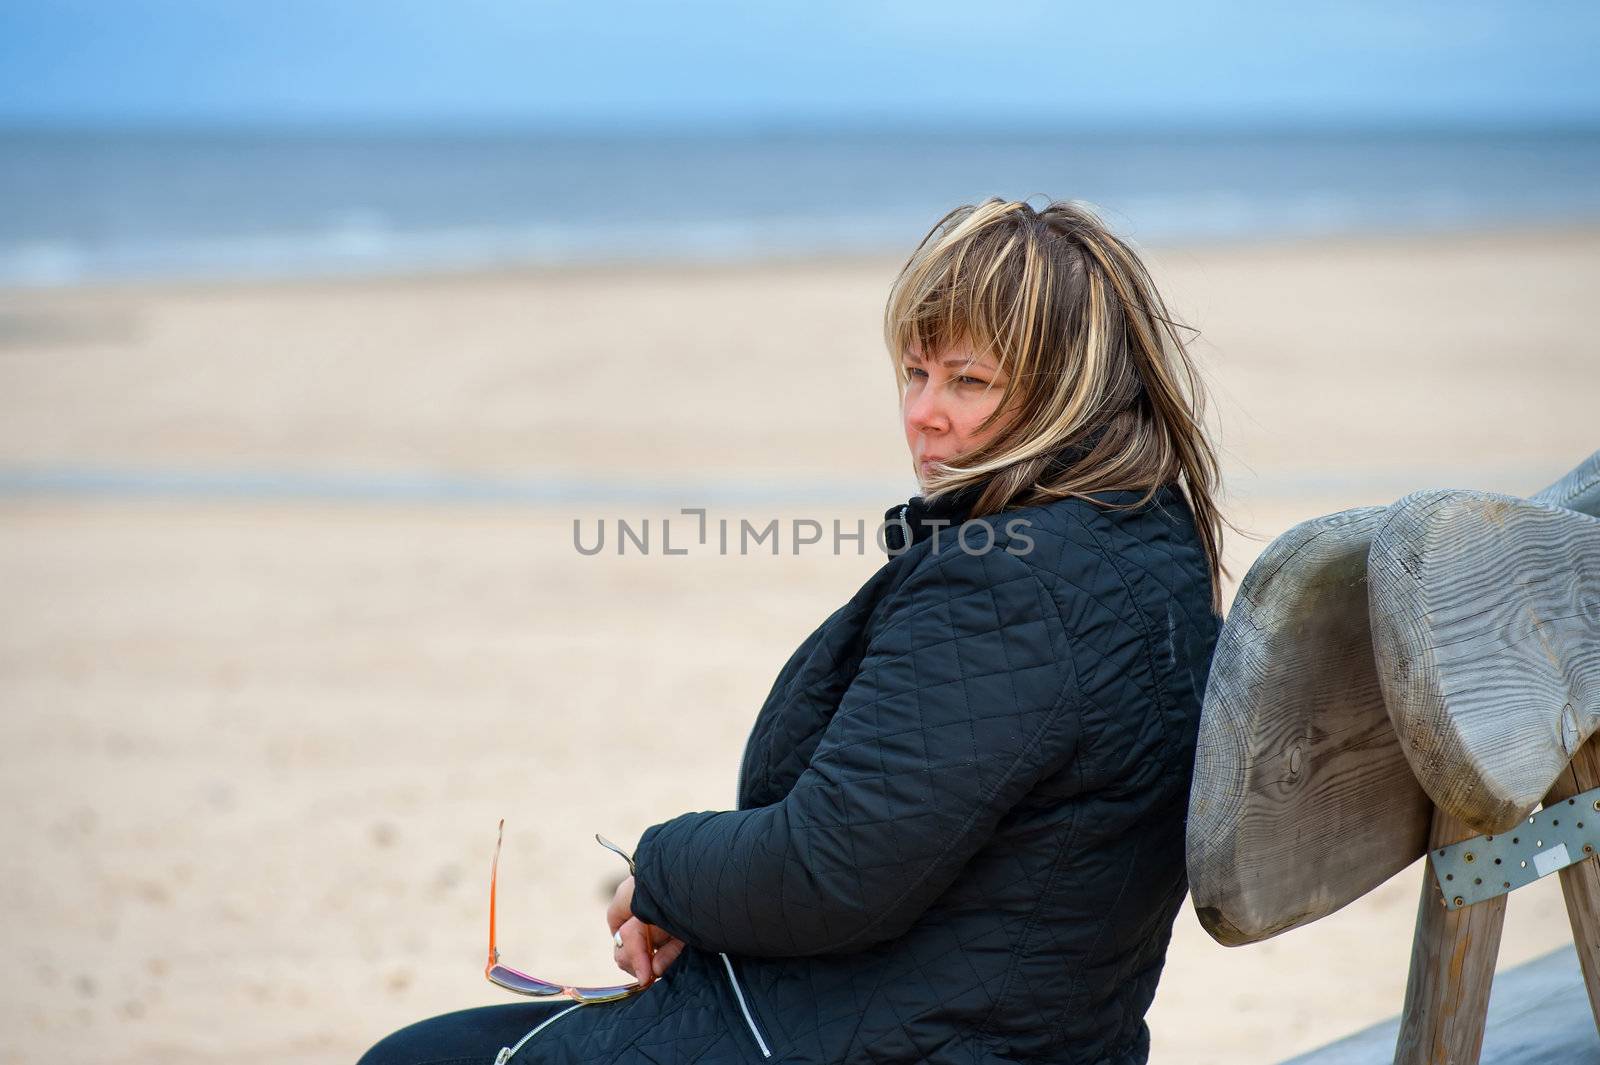 Mature woman relaxing at the Baltic sea in autumn day.